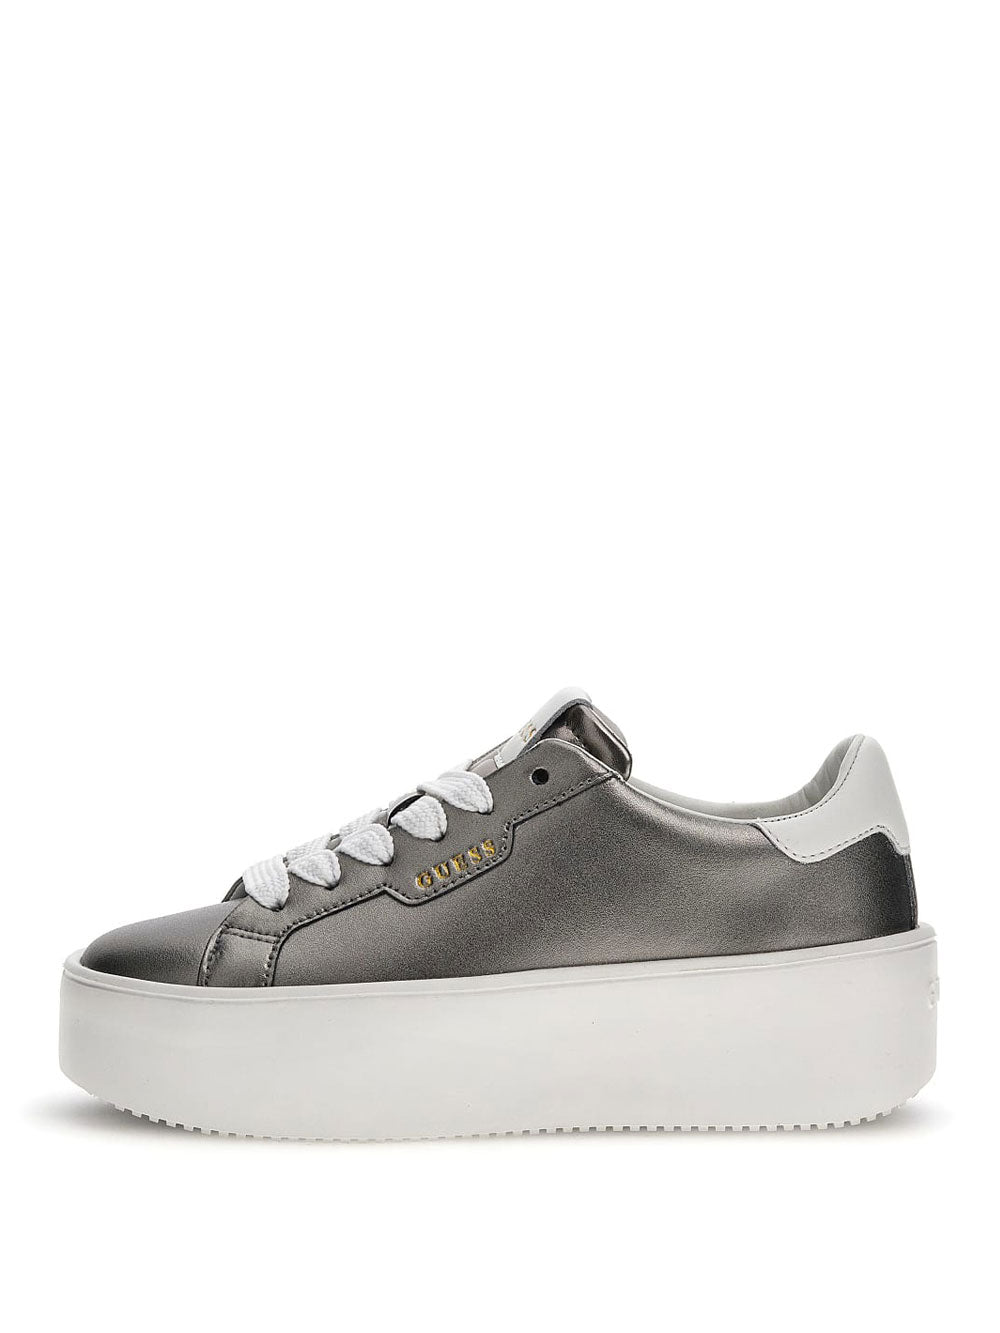 GUESS Sneakers Donna - Grigio